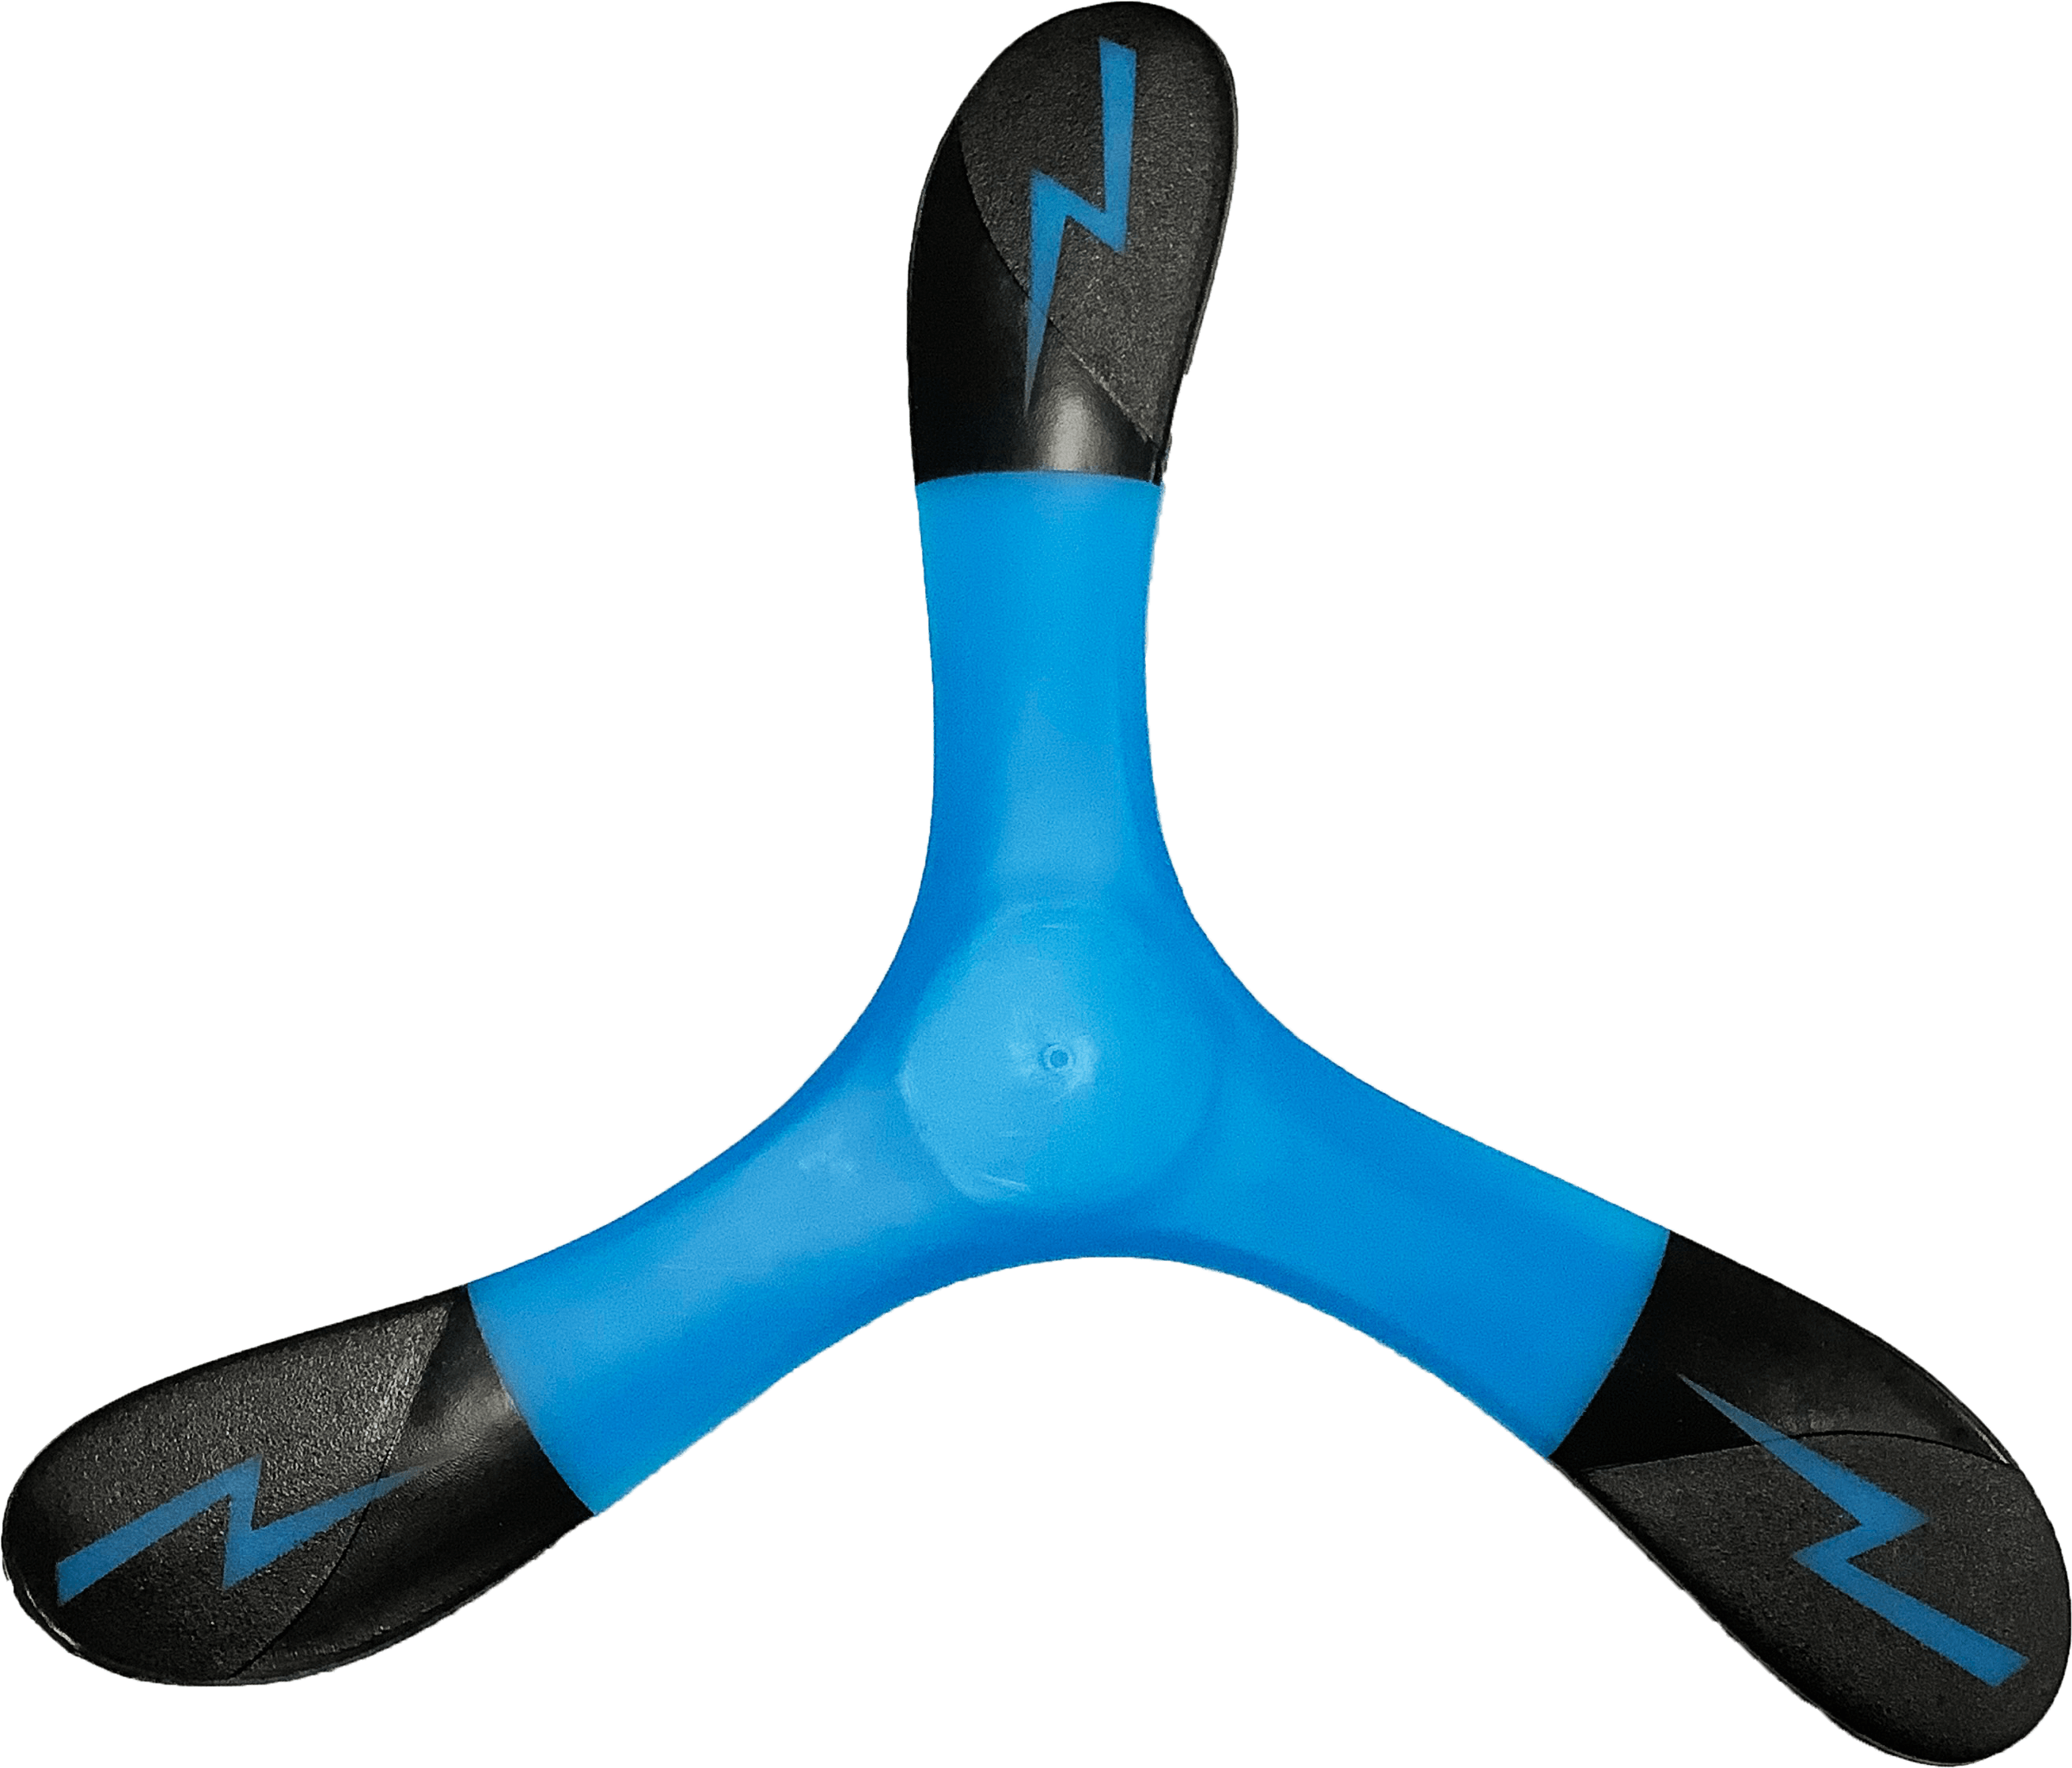 Blue Bolt Boomerang - Light and Fast Boomerangs for Hobby Throwers